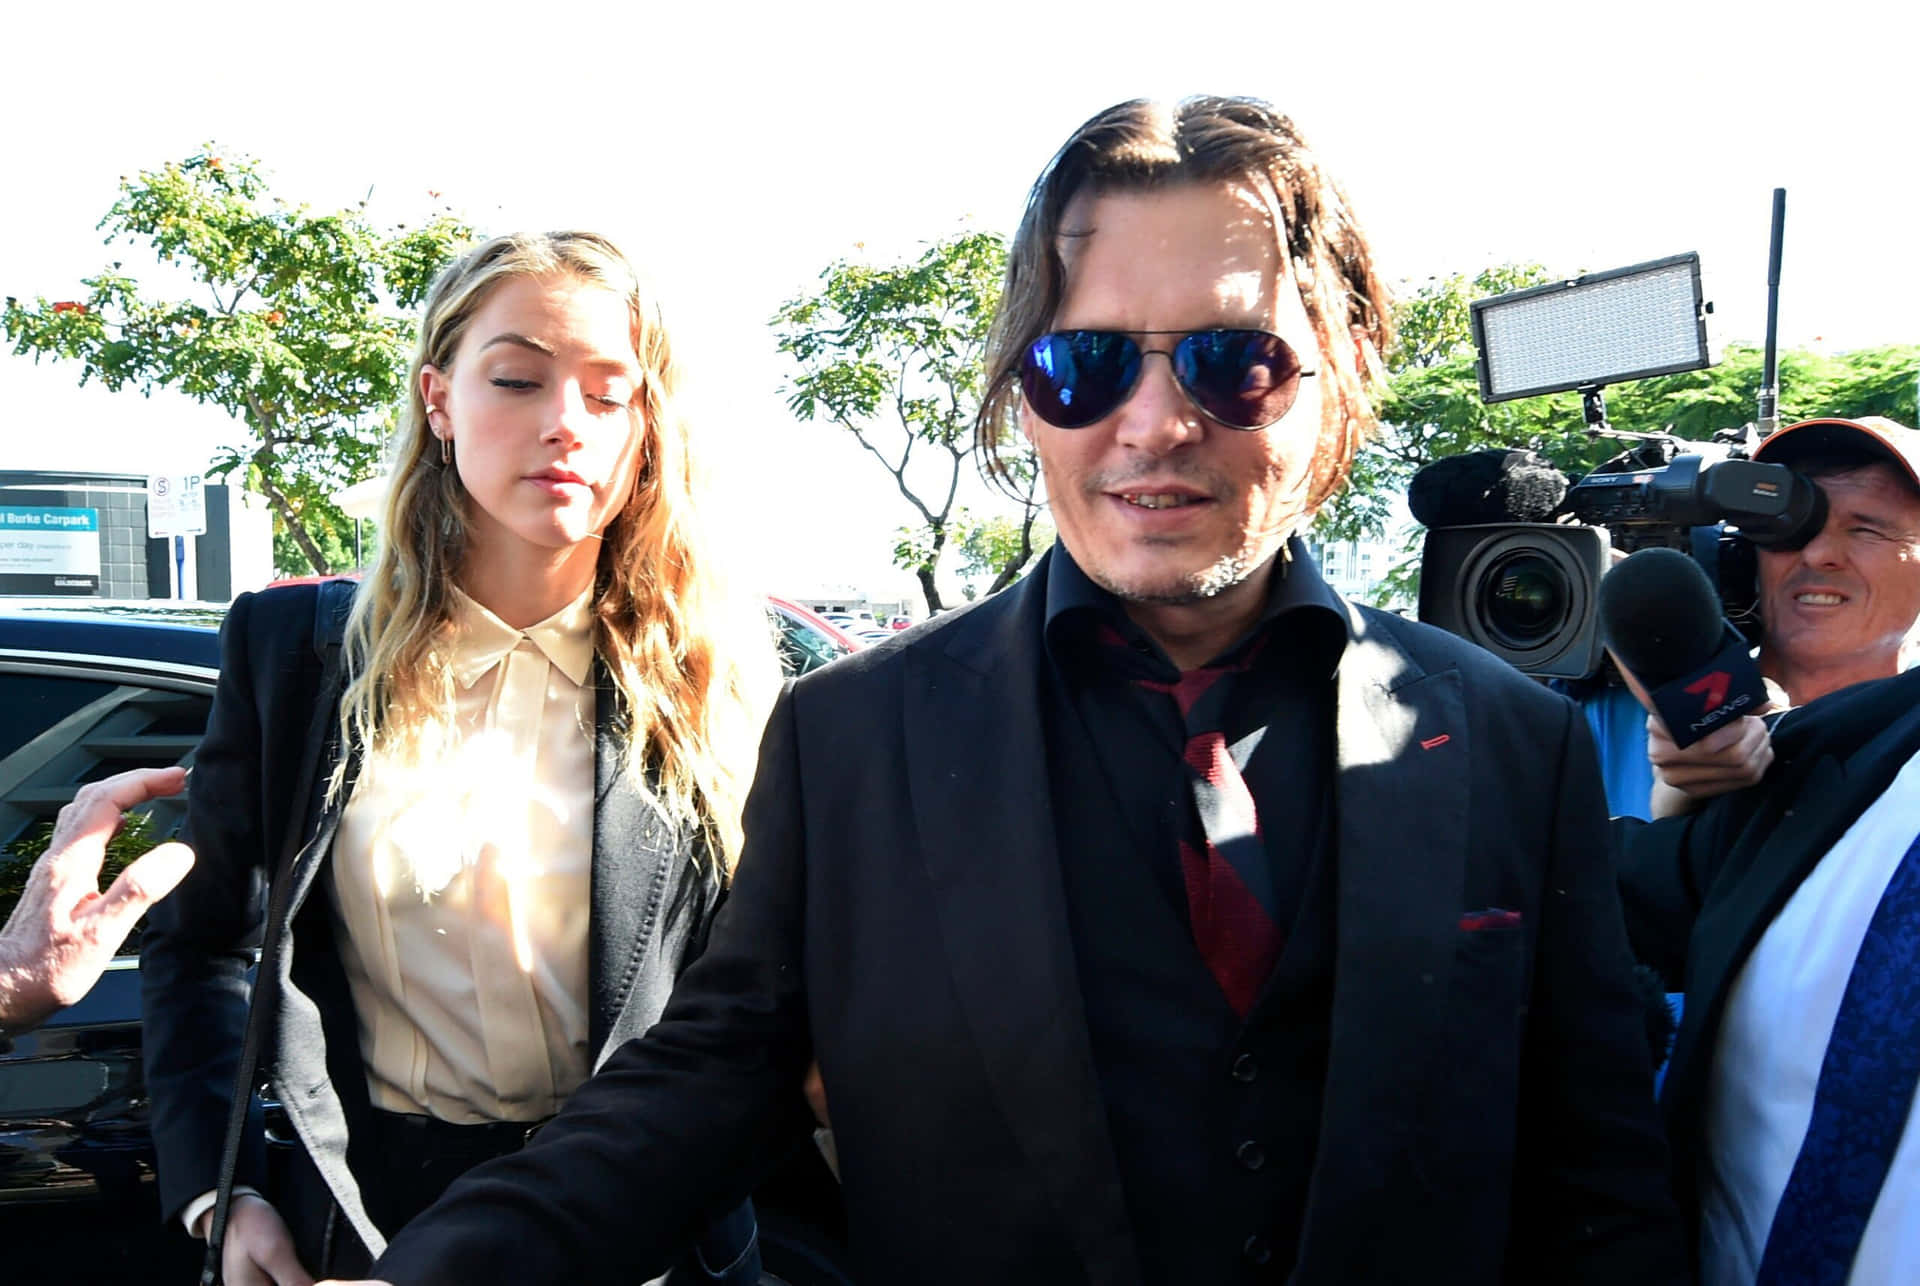 Johnny Depp and Amber Heard in a romantic moment